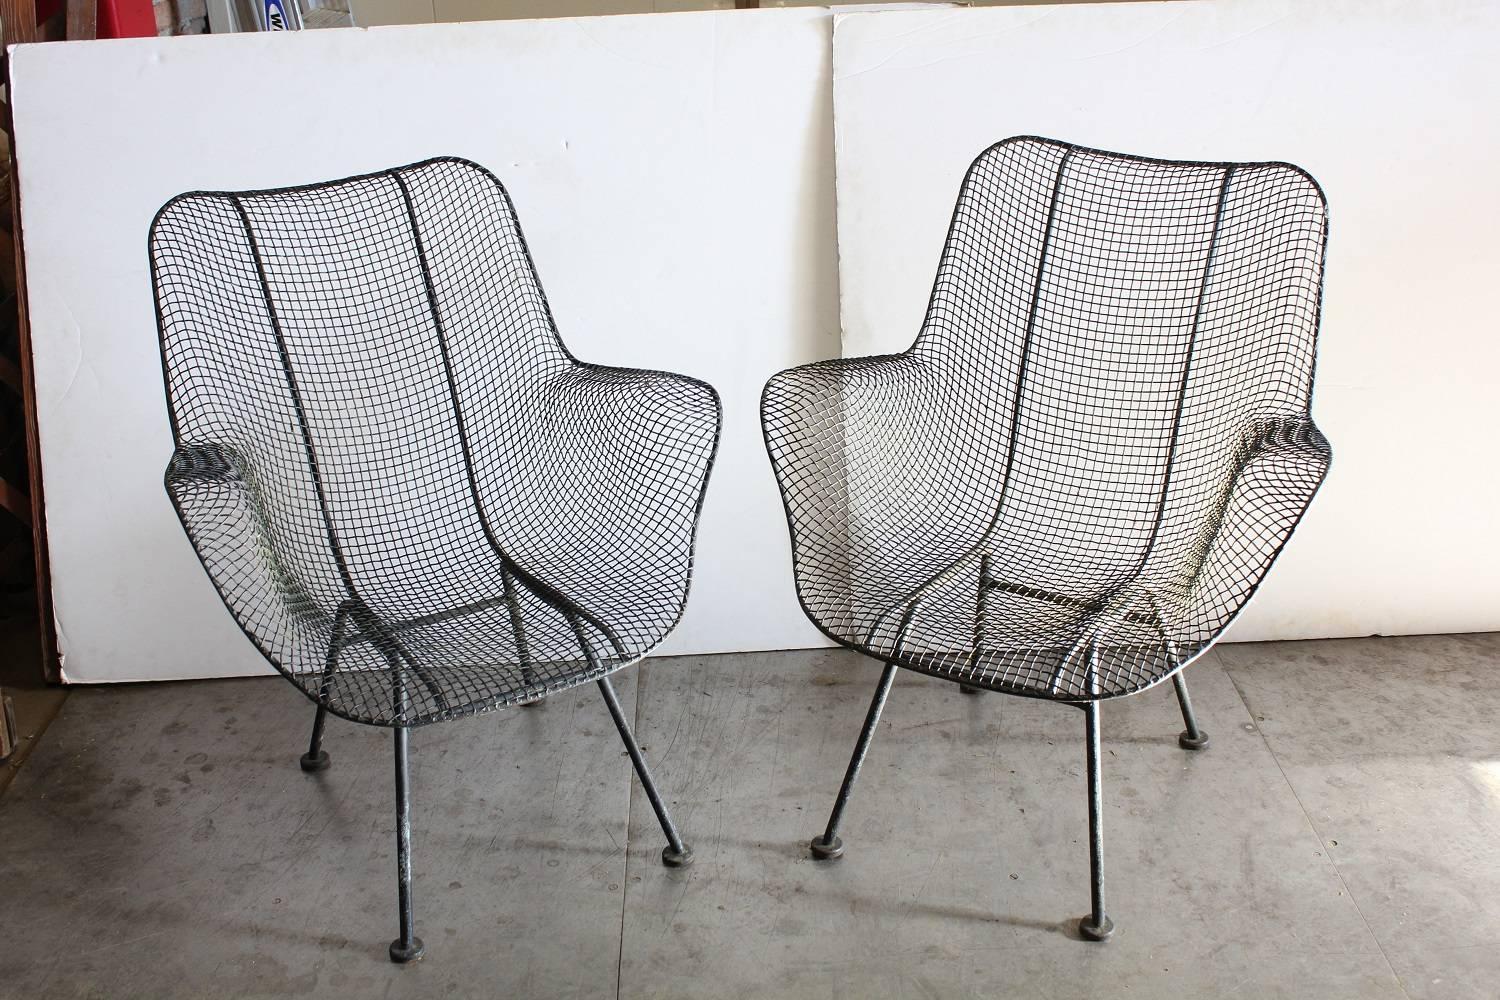 American Mid-Century Sculptura Lounge Chair by Woodard, For Sale